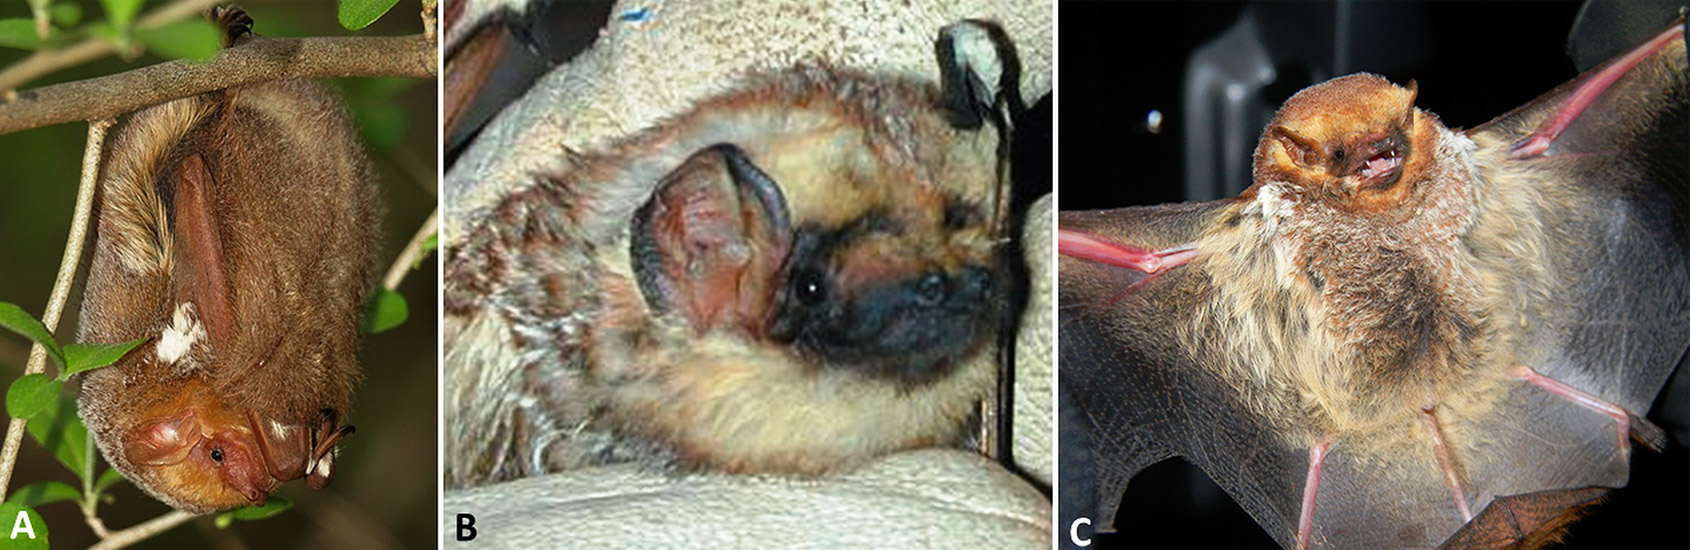 Different types of bat with corresponding letters